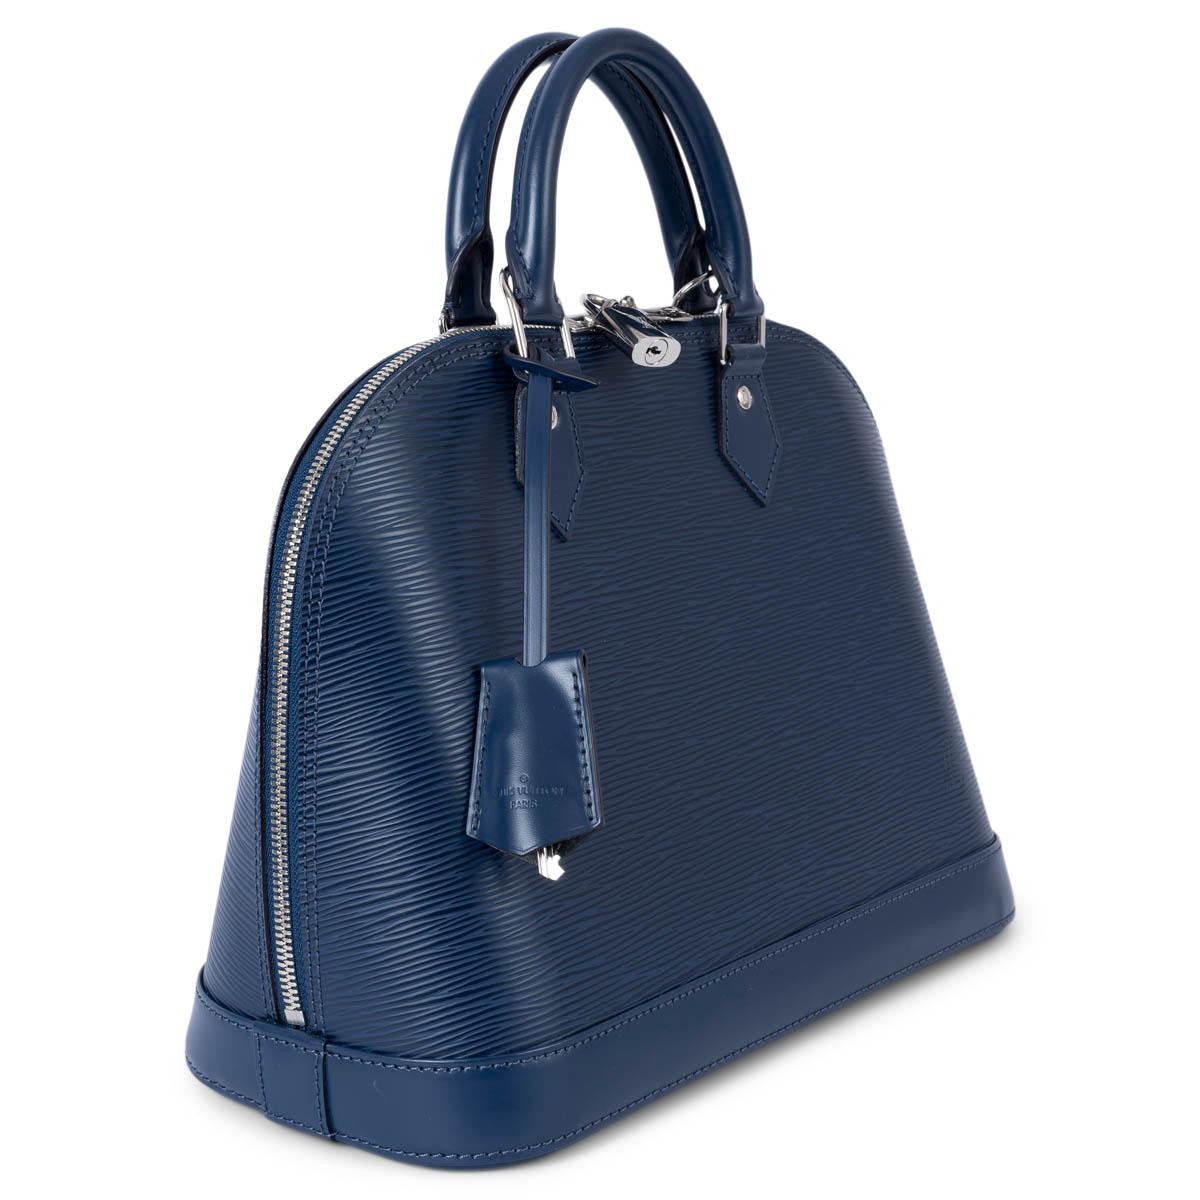 100% authentic Louis Vuitton Alma PM handbag in Myrtille (navy blue) Epi leather featuring silver-tone hardware. Opens with a double zipper on top and is lined in navy blue alcantara with two open pockets against the back. The design features